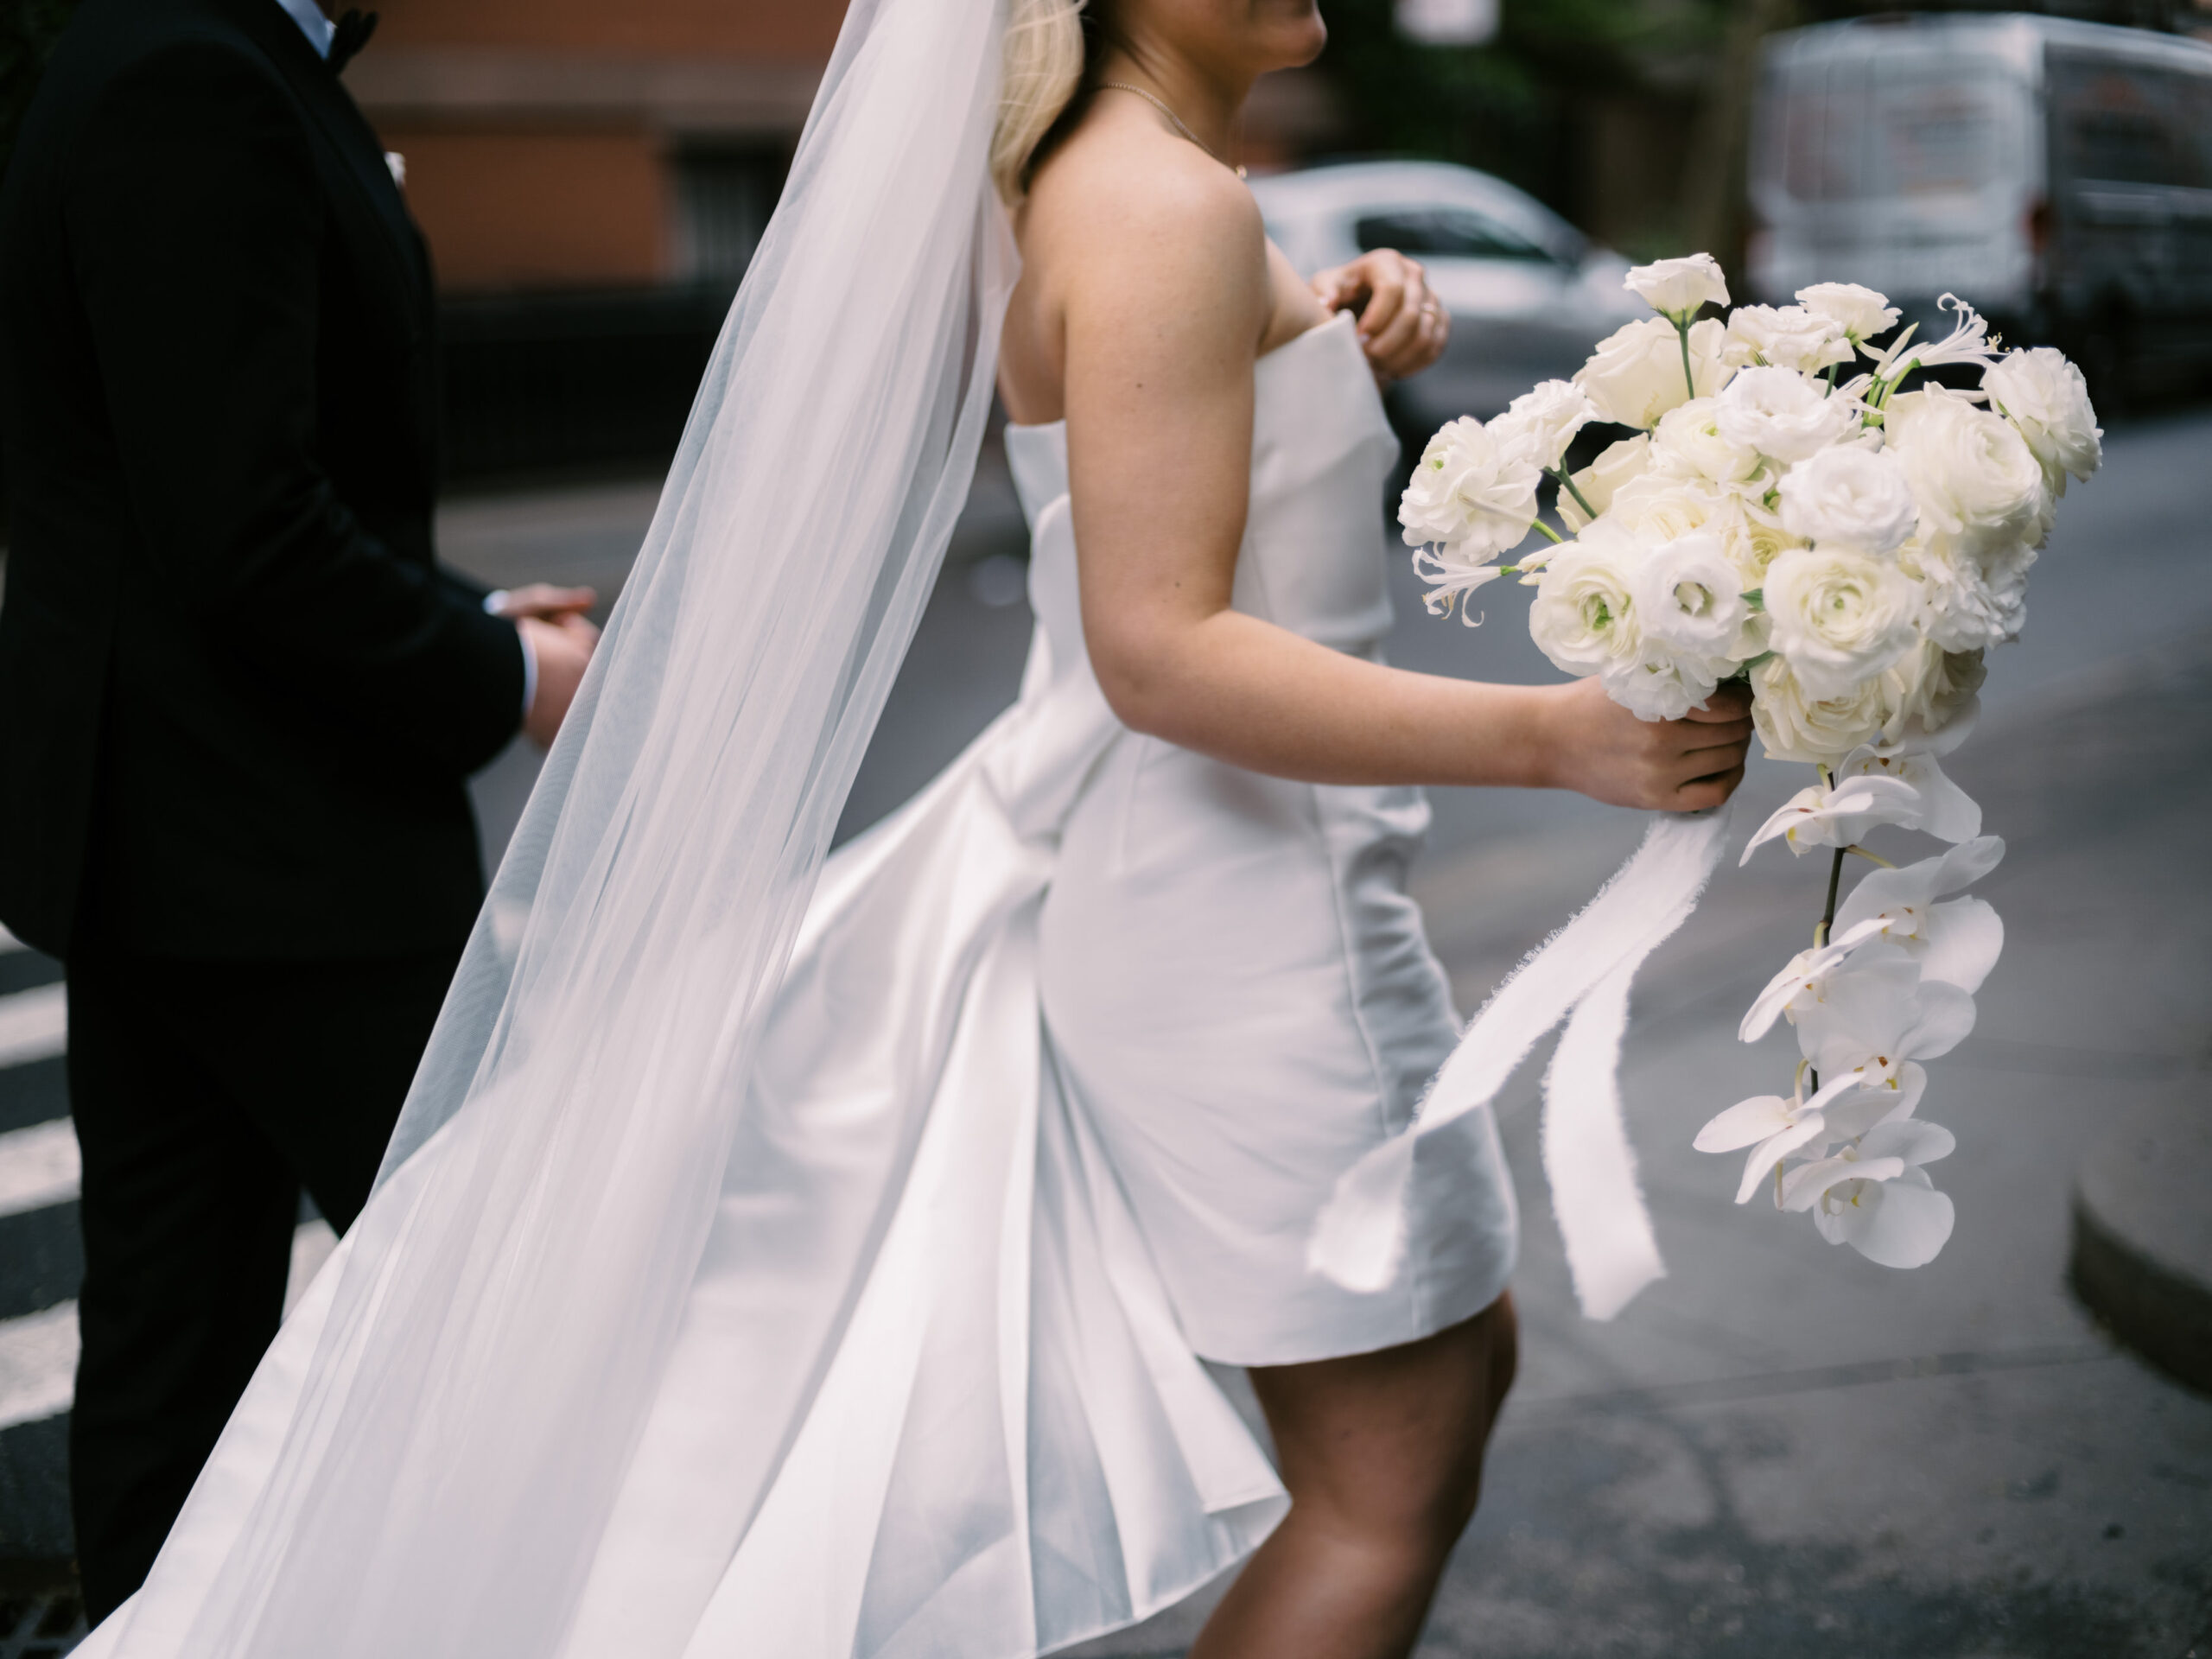 Close-up shot of the bride in her wedding dress, holding a pretty white flower bouquet. Image by Jenny Fu Studio